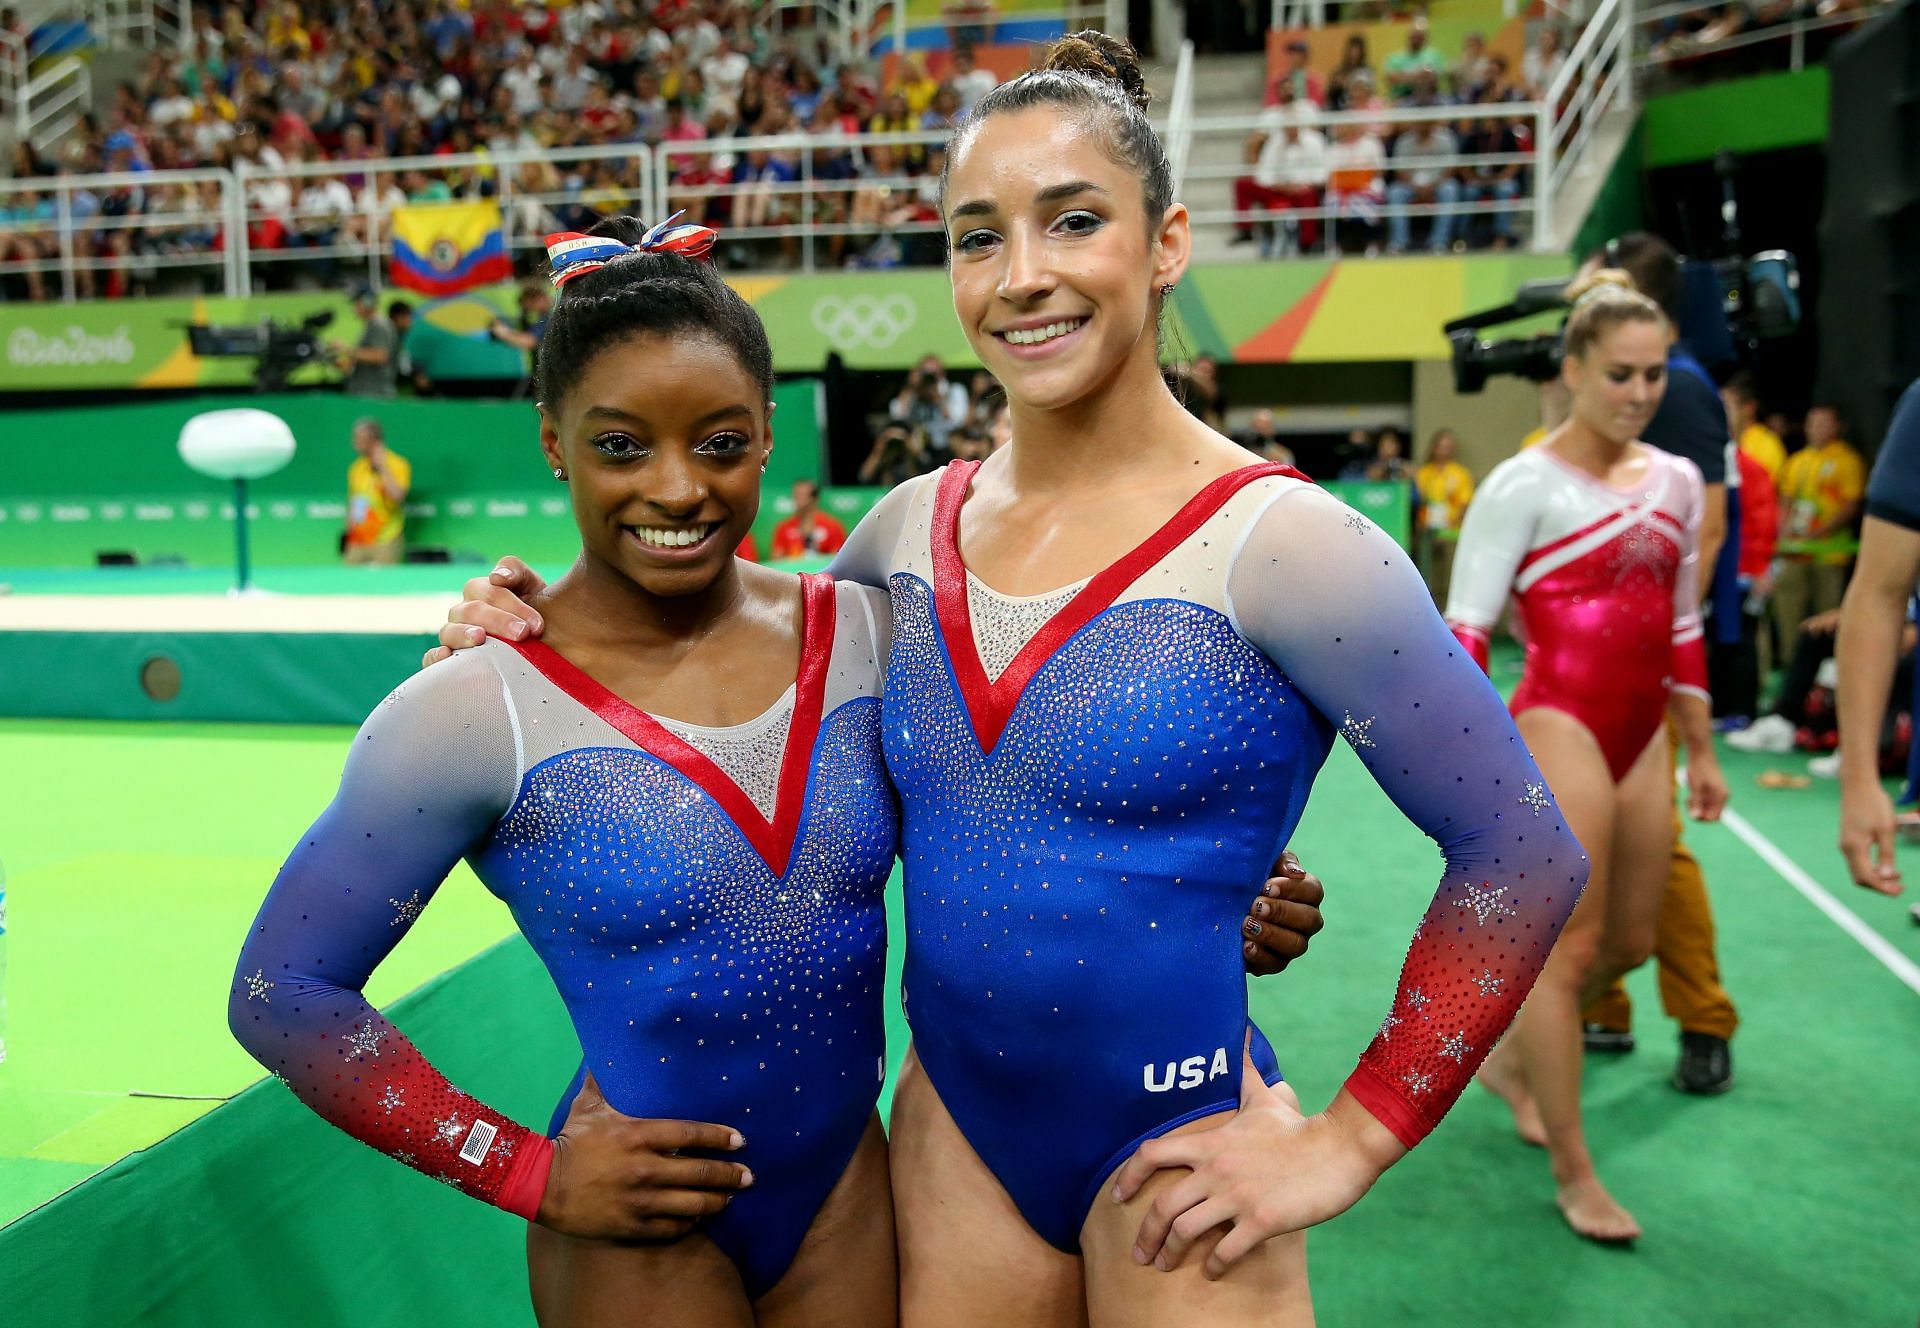 Simone Biles (L) and Alexandra Raisman (R) of the United States pose for photographs after competing on the Women&#039;s Floor Final on Day 11 of the Rio 2016 Olympic Games